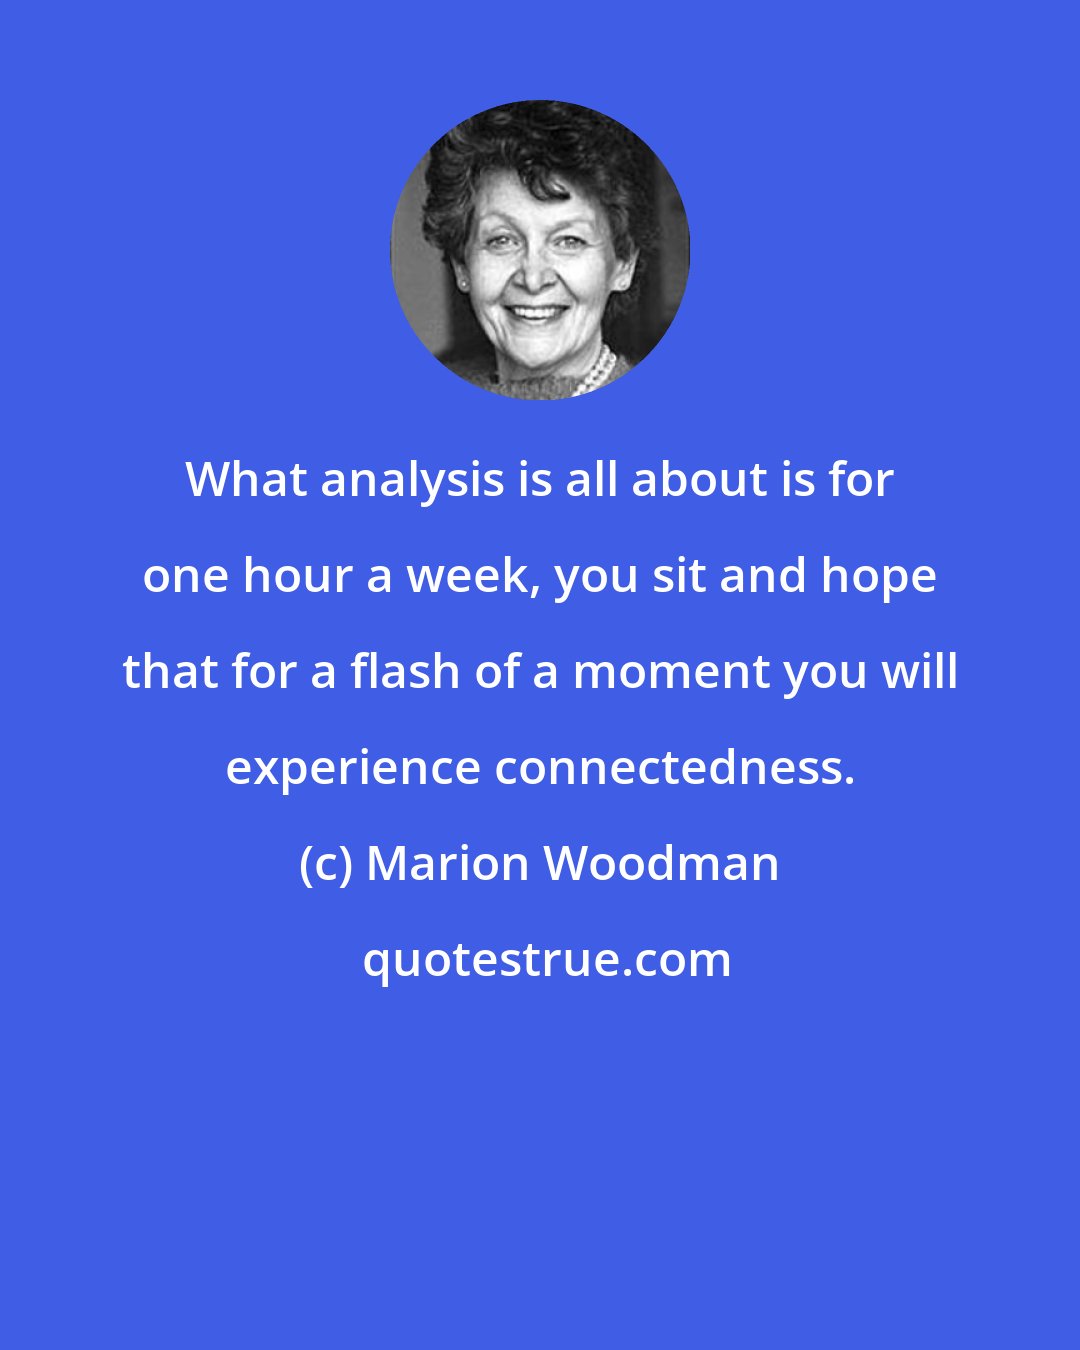 Marion Woodman: What analysis is all about is for one hour a week, you sit and hope that for a flash of a moment you will experience connectedness.